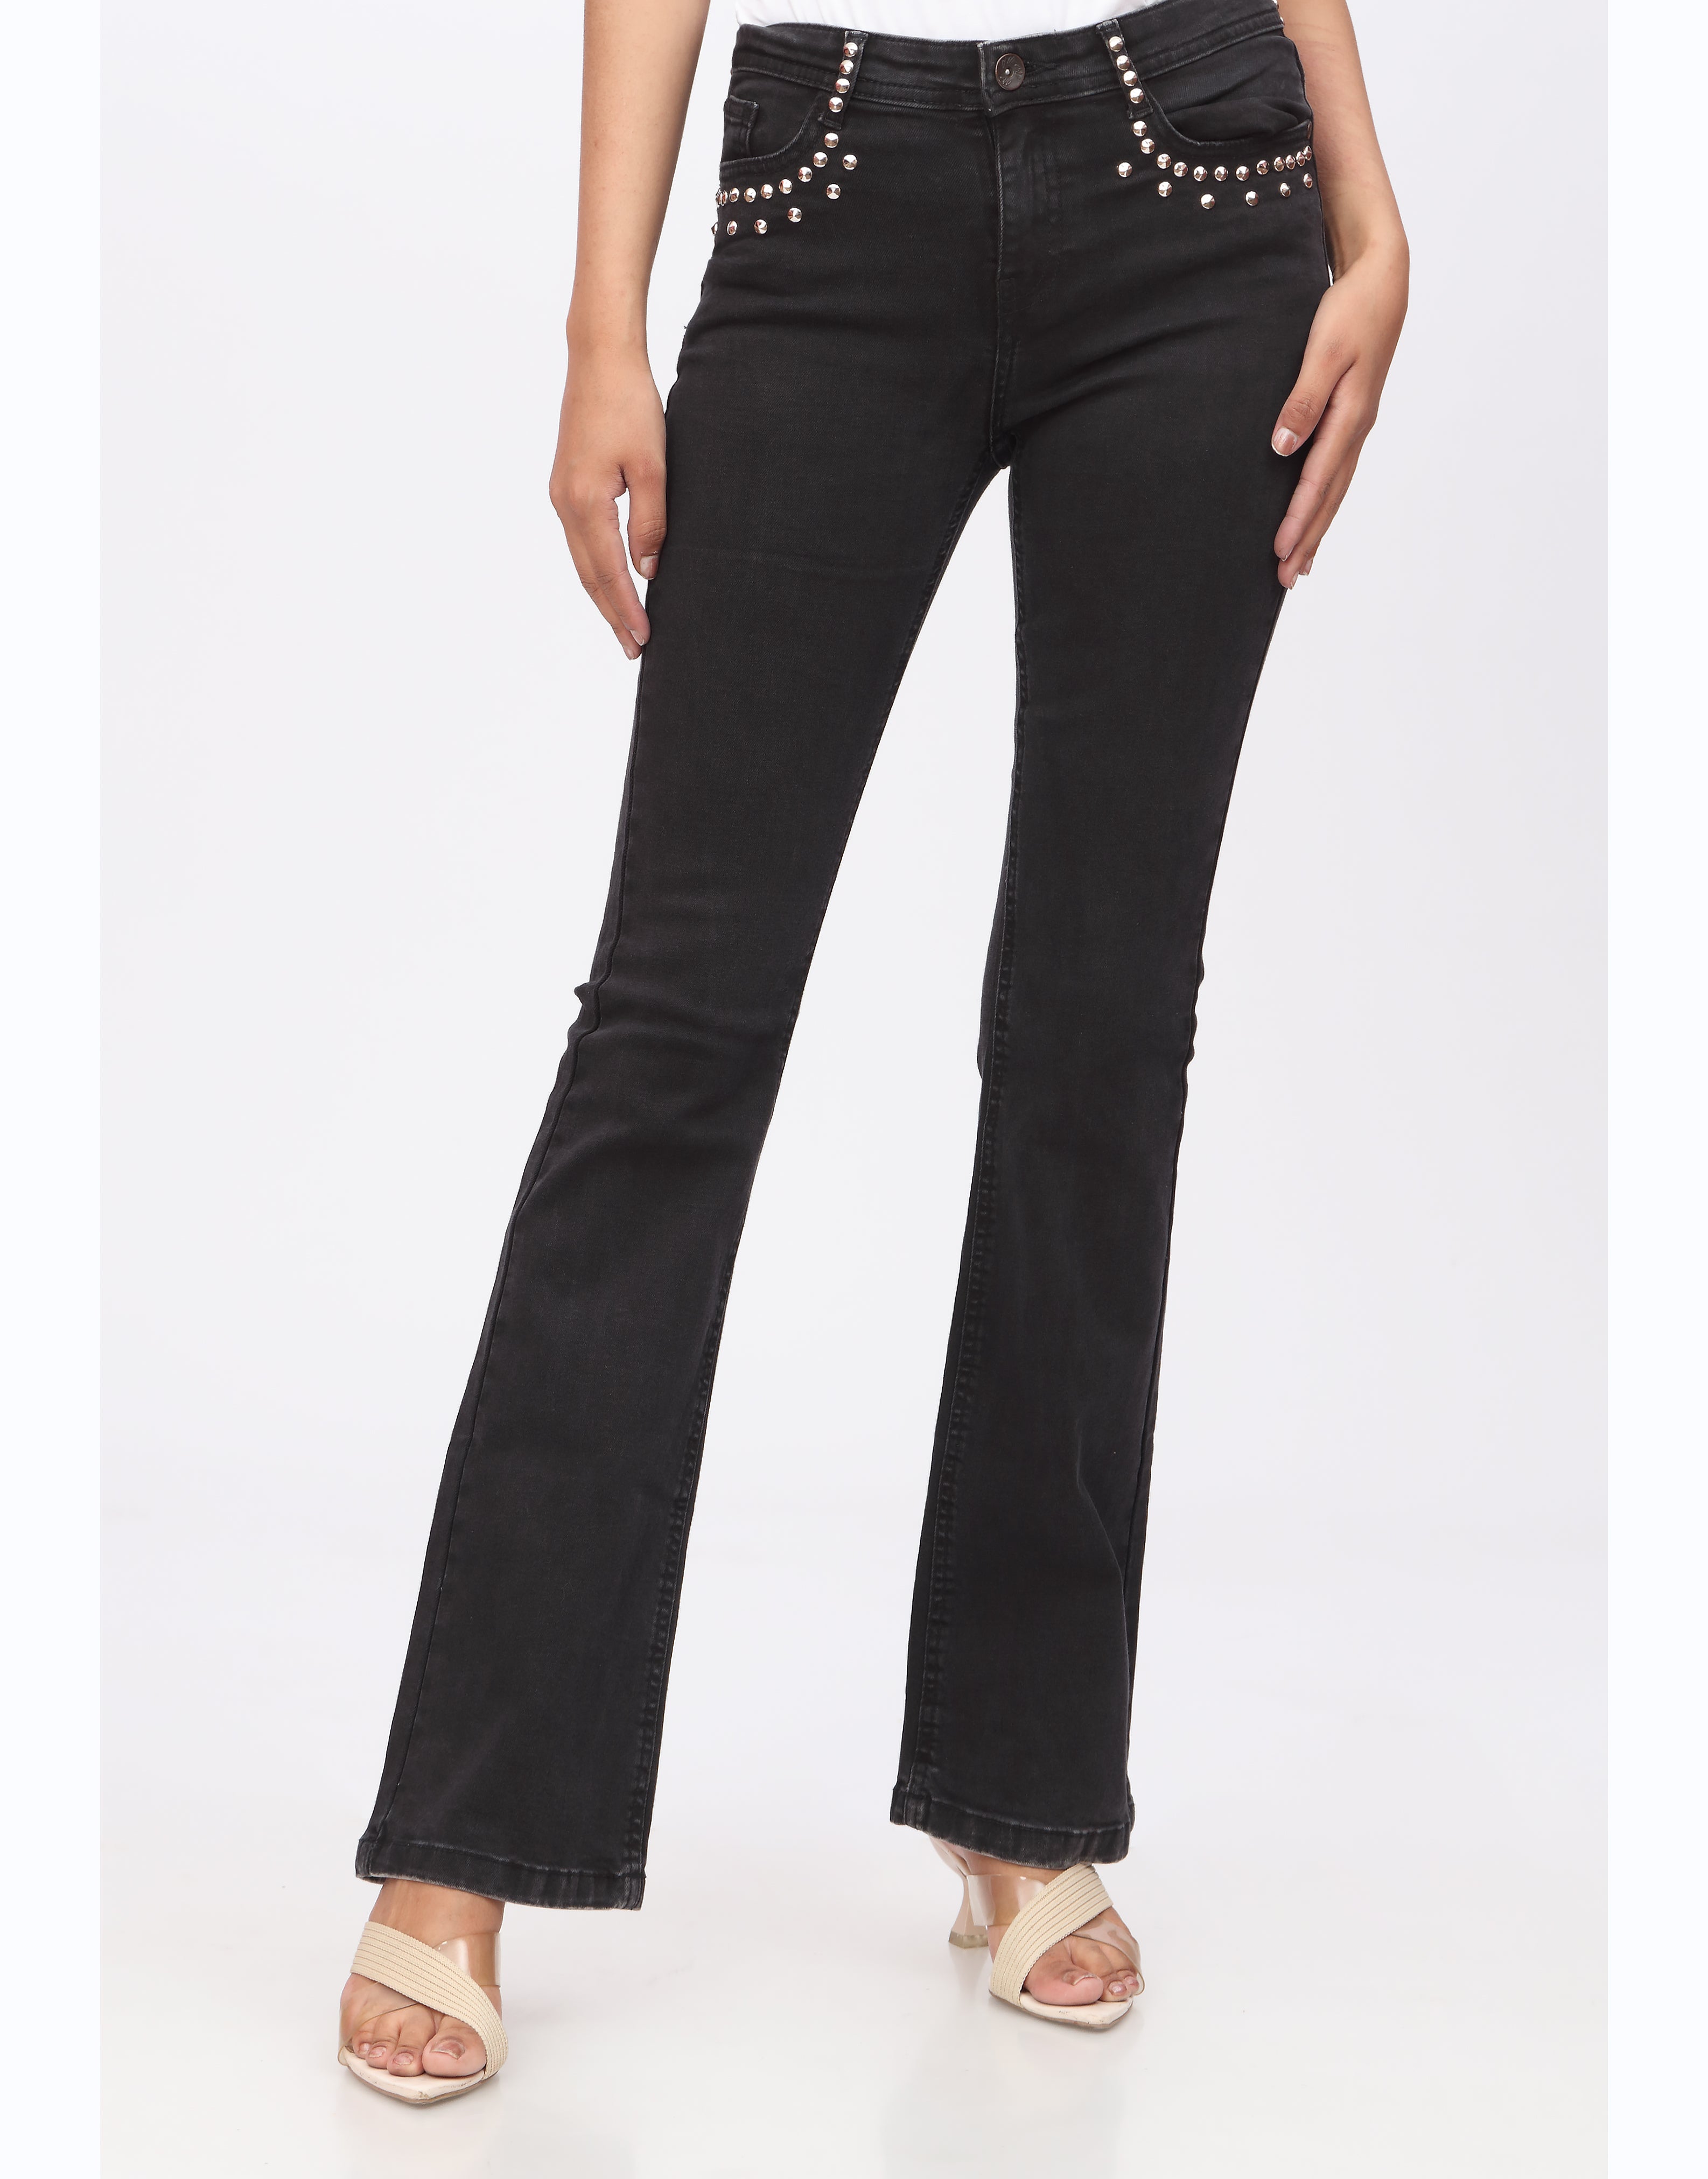 High Rise Flared Jeans in Jet Black with Stylish Pocket